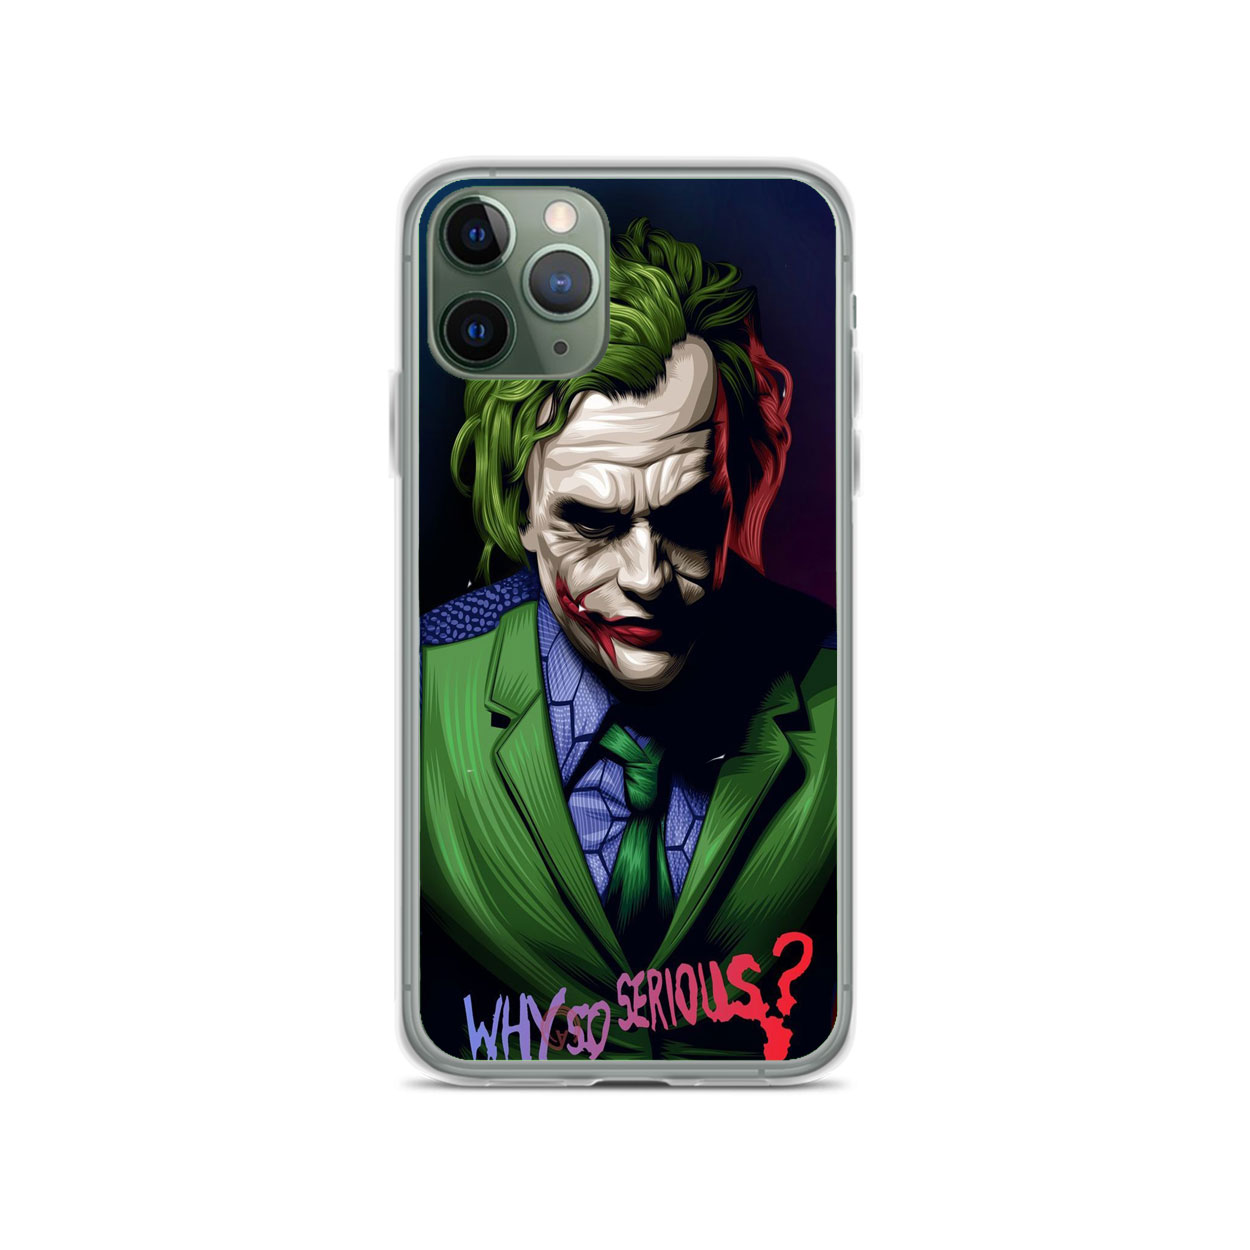 Why So Serious Jokers iPhone Case for XS/XS Max,XR,X,8/8 Plus,7/7Plus,6/6S